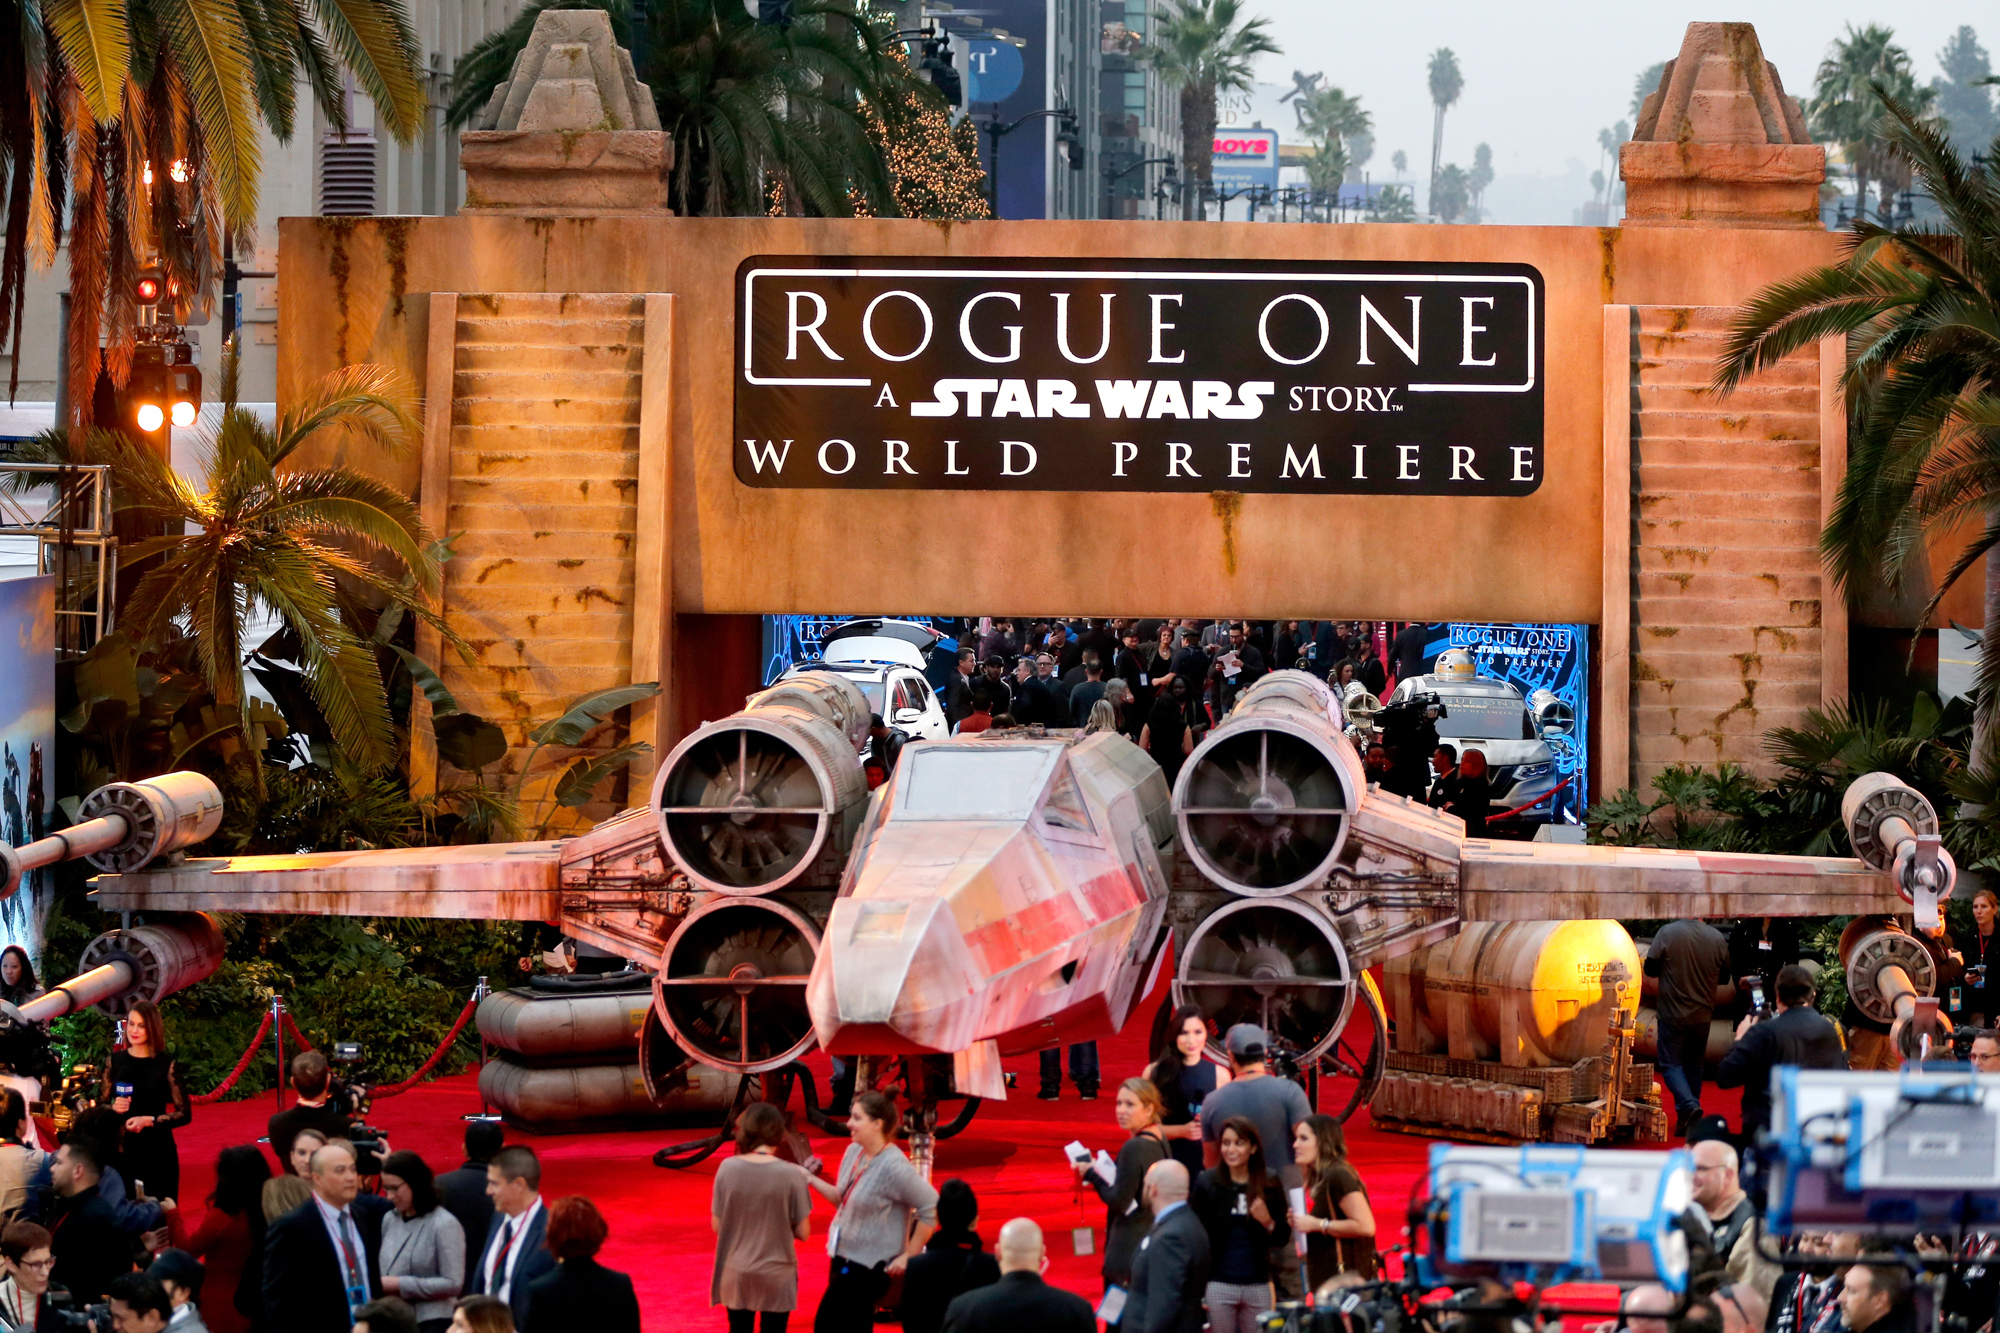 Rogue One: A Star Wars Story Has Powerful Premiere at Hollywood’s Pantages Theatre